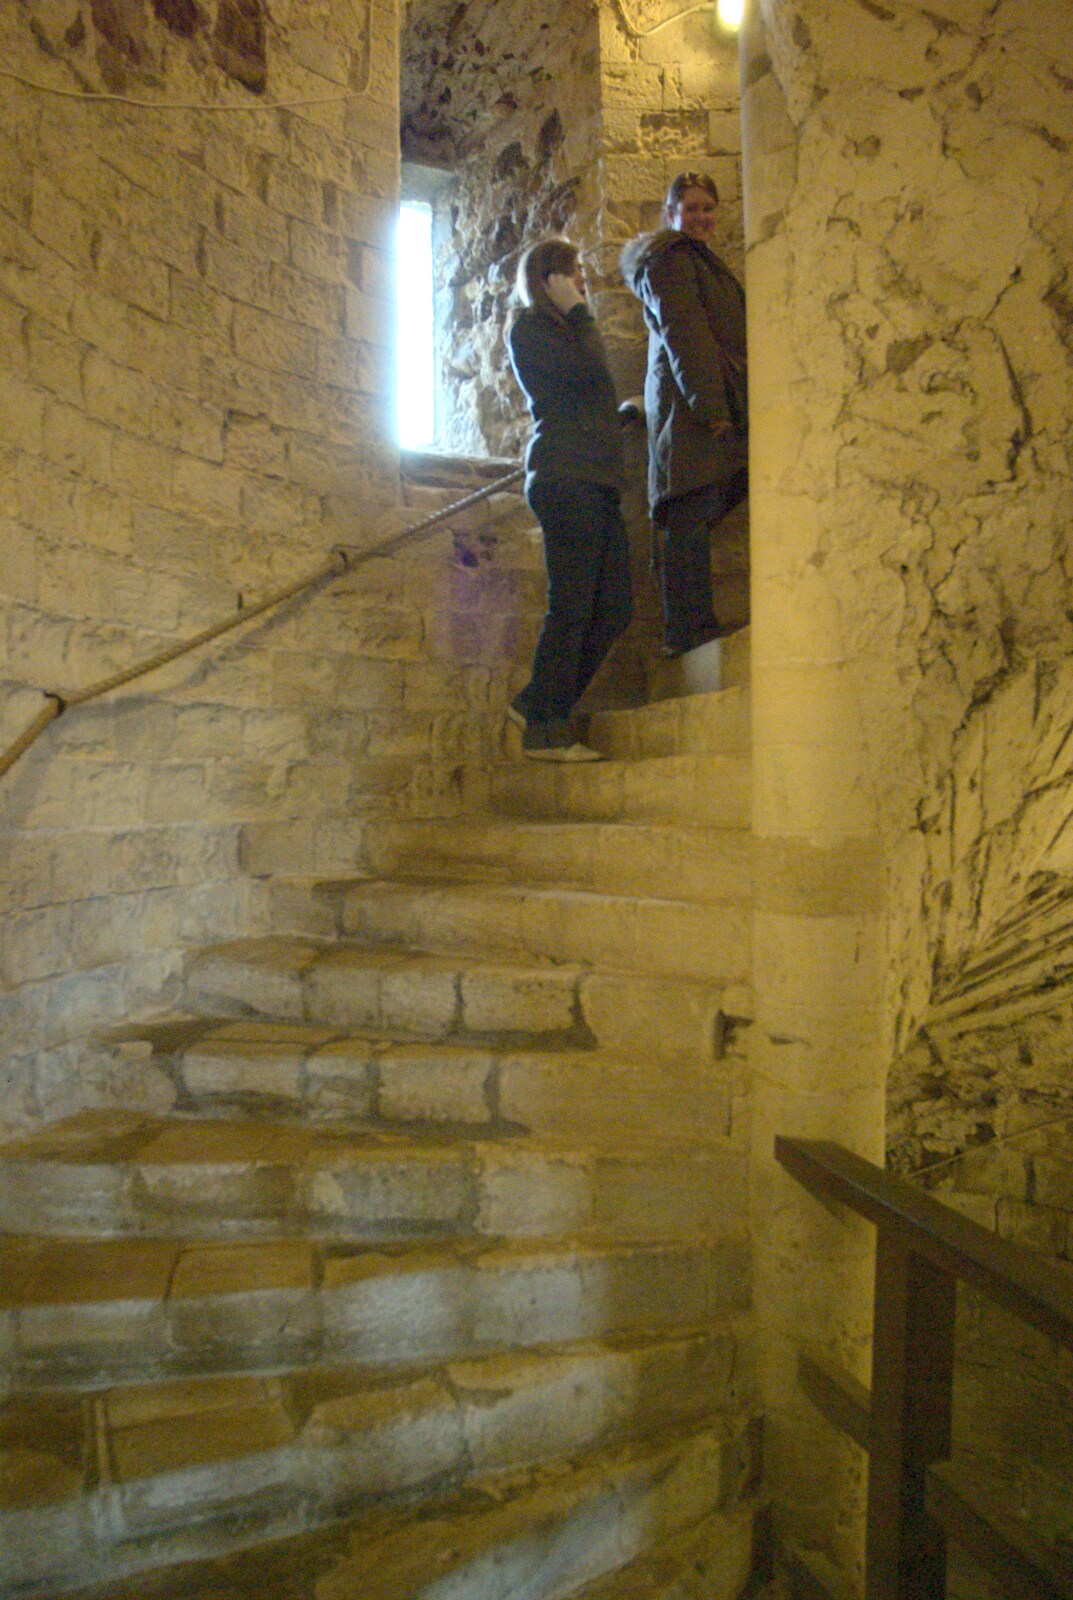 Up the winding steps inside Orford castle from A Trip to Orford Castle, Suffolk - 14th March 2009